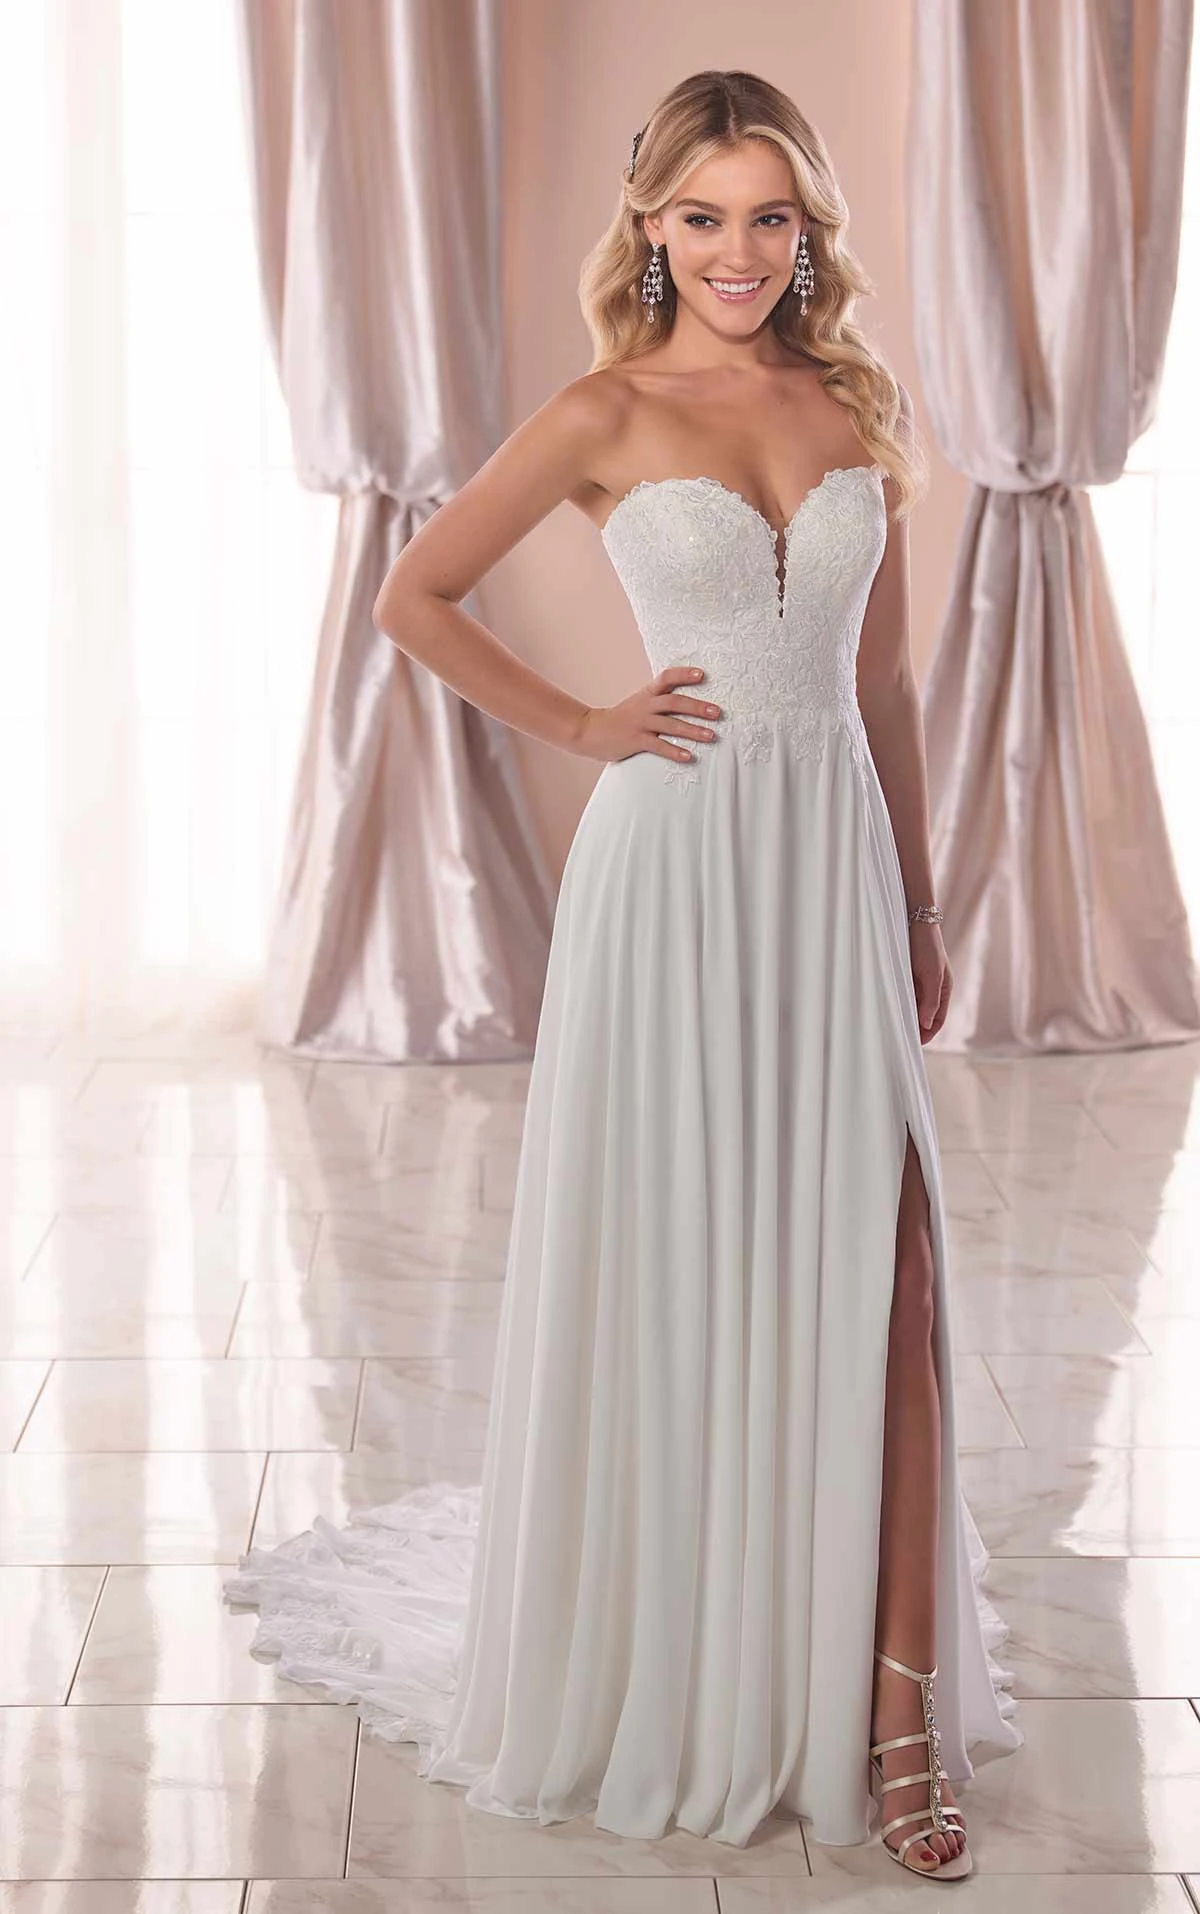 Details about   Strapless Chiffon Pearl Beach Wedding Dress Ivory White Simple Bridal Gown Size